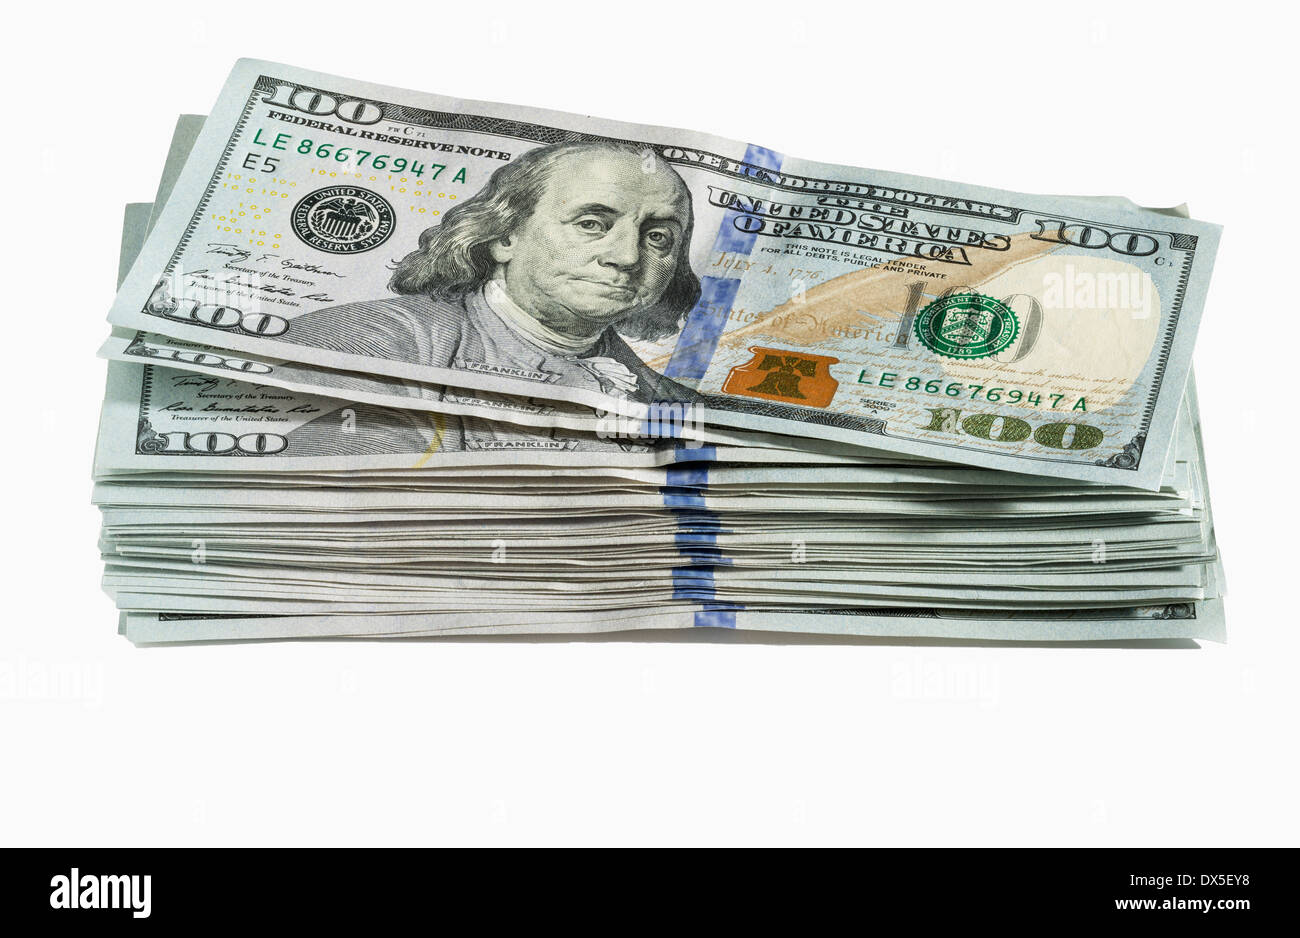 Pile of US currency one hundred dollar bills Stock Photo